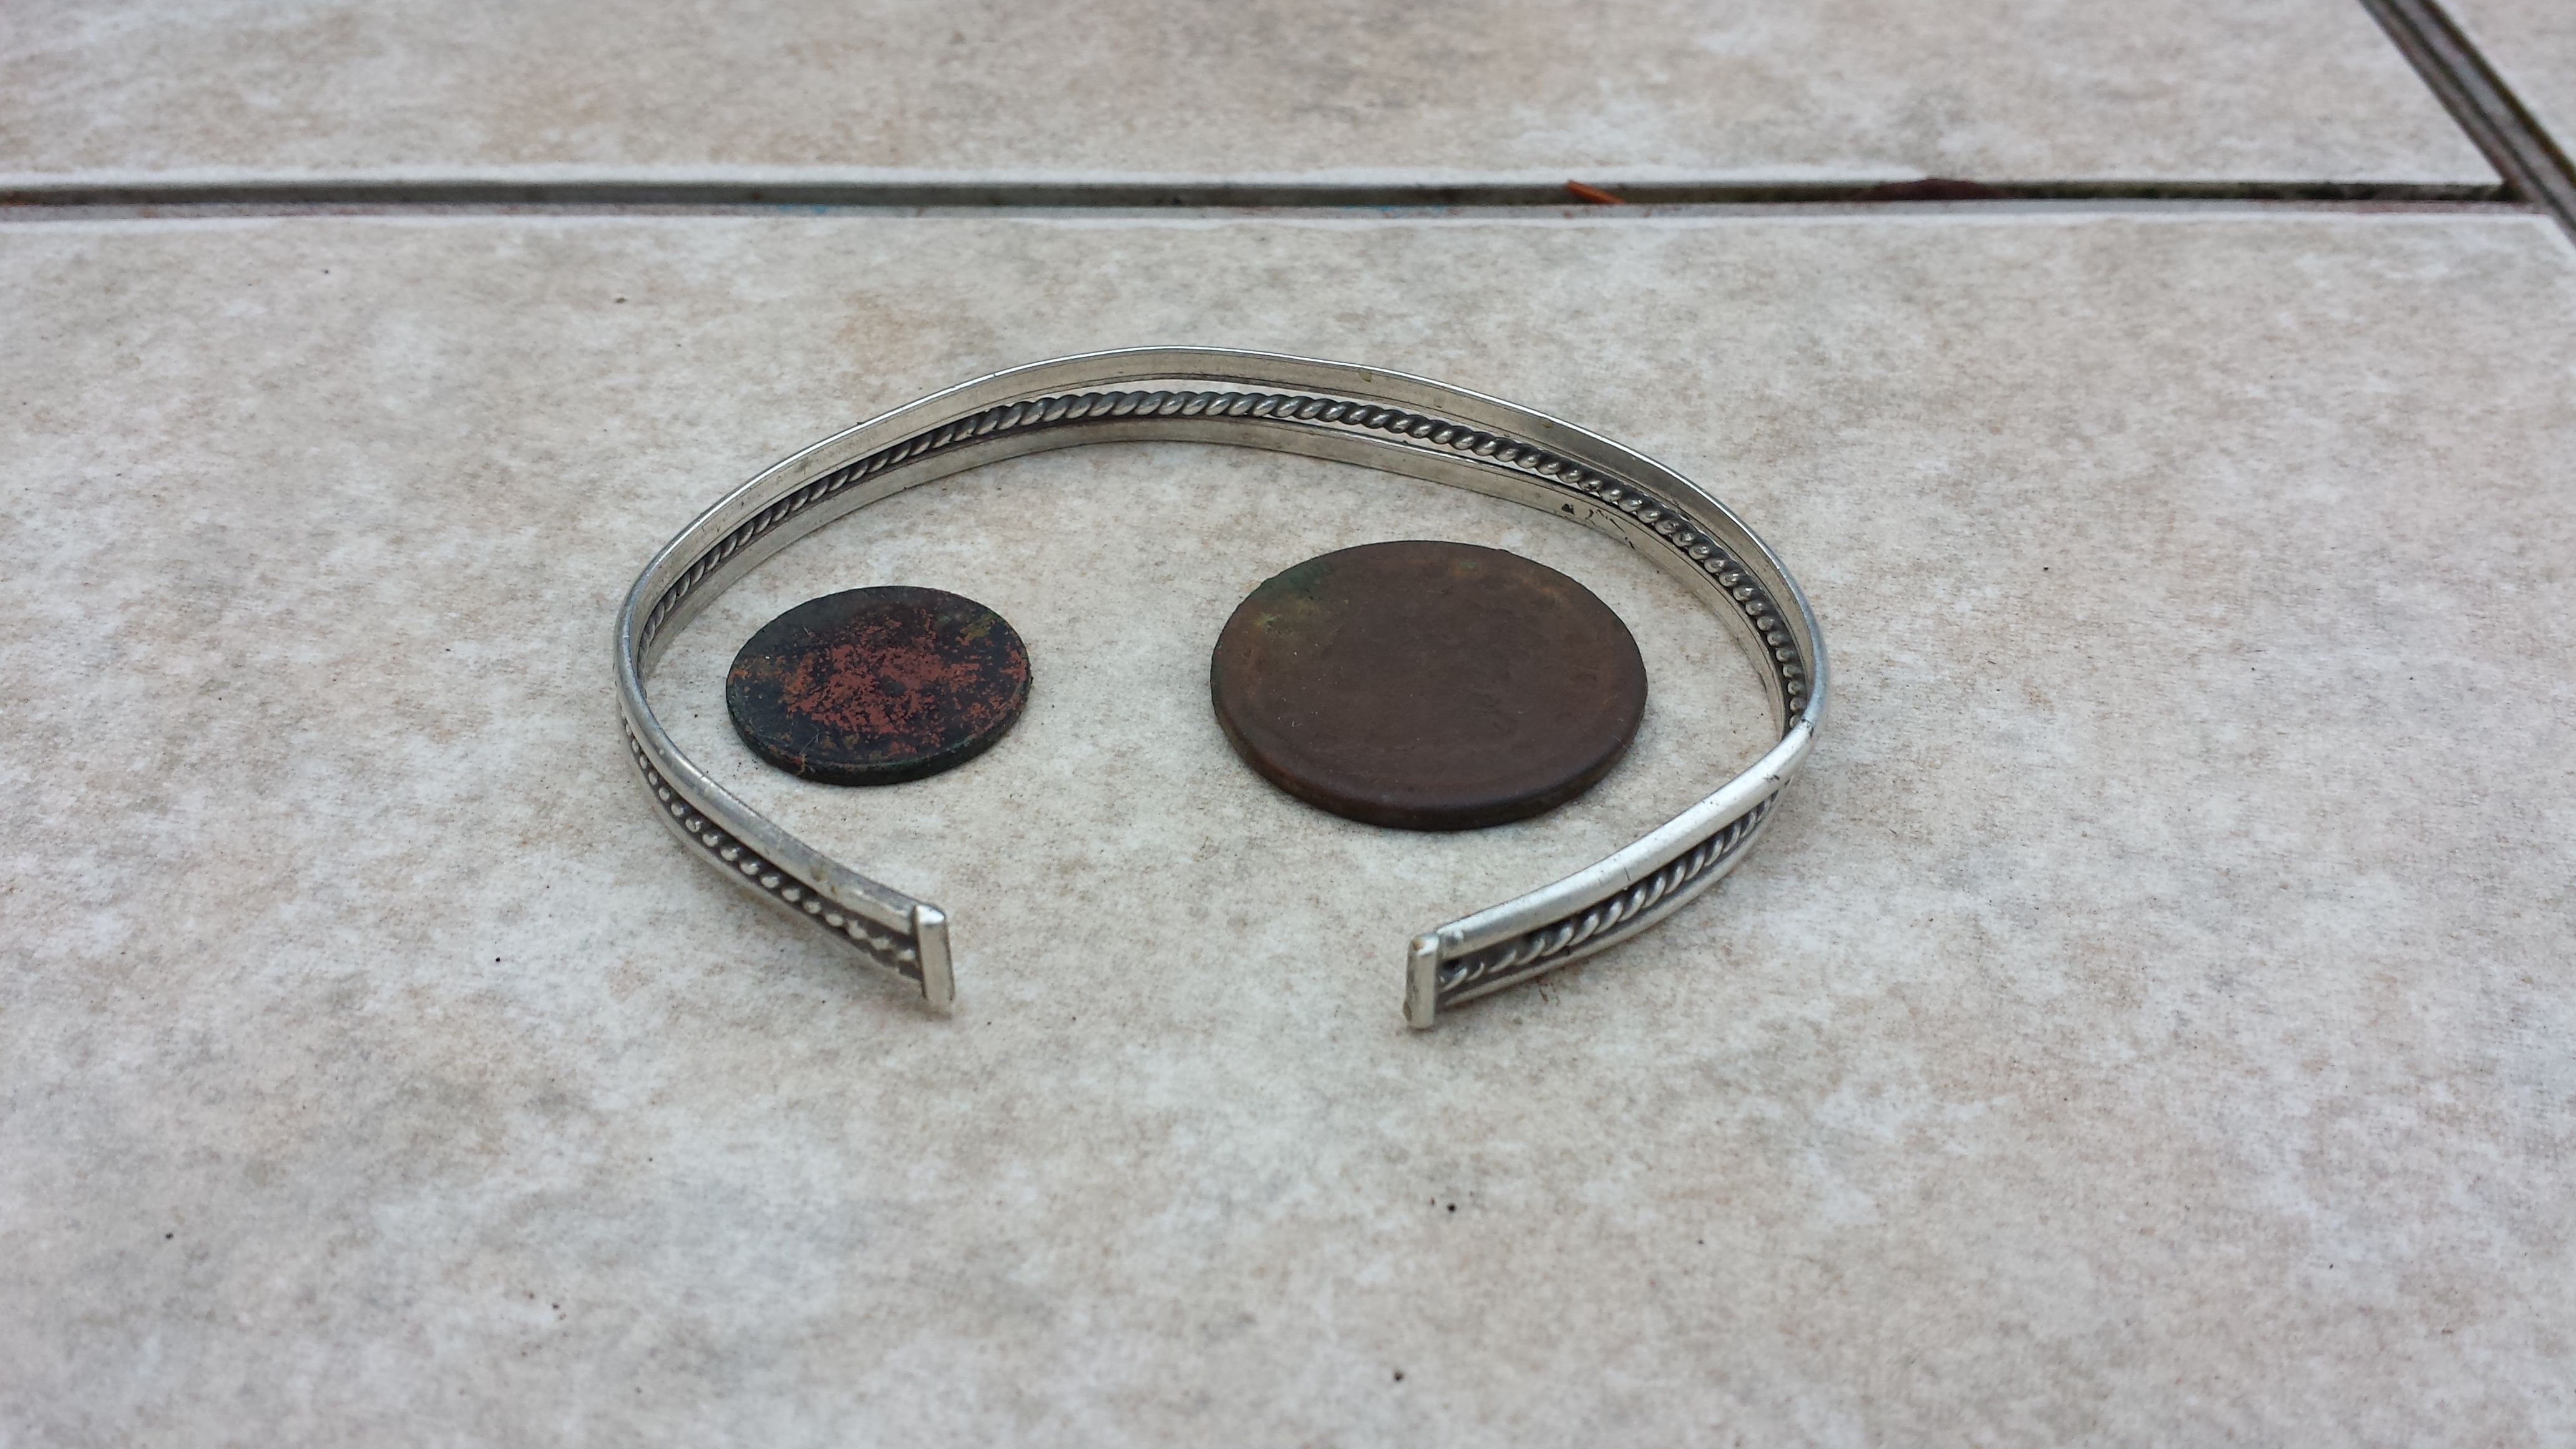 20151205 155954  Barb's house notables  1851 LC, 1941 wheat, and silver bracelet.